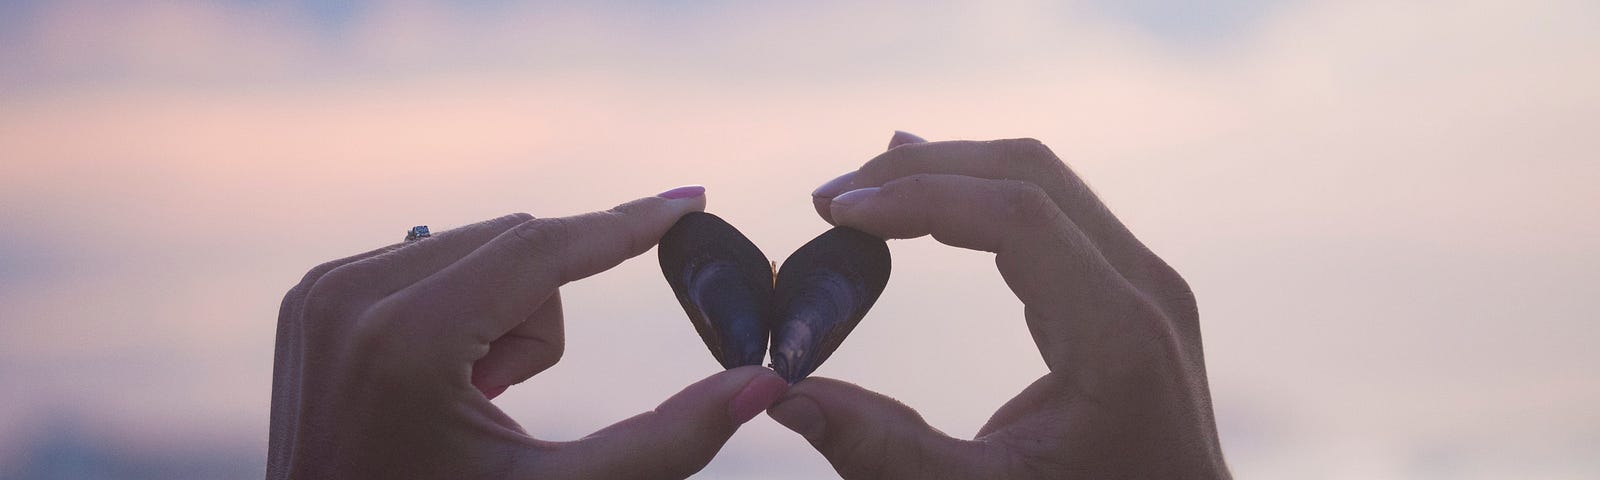 Two hands holding two pebbles forming a heart sign.